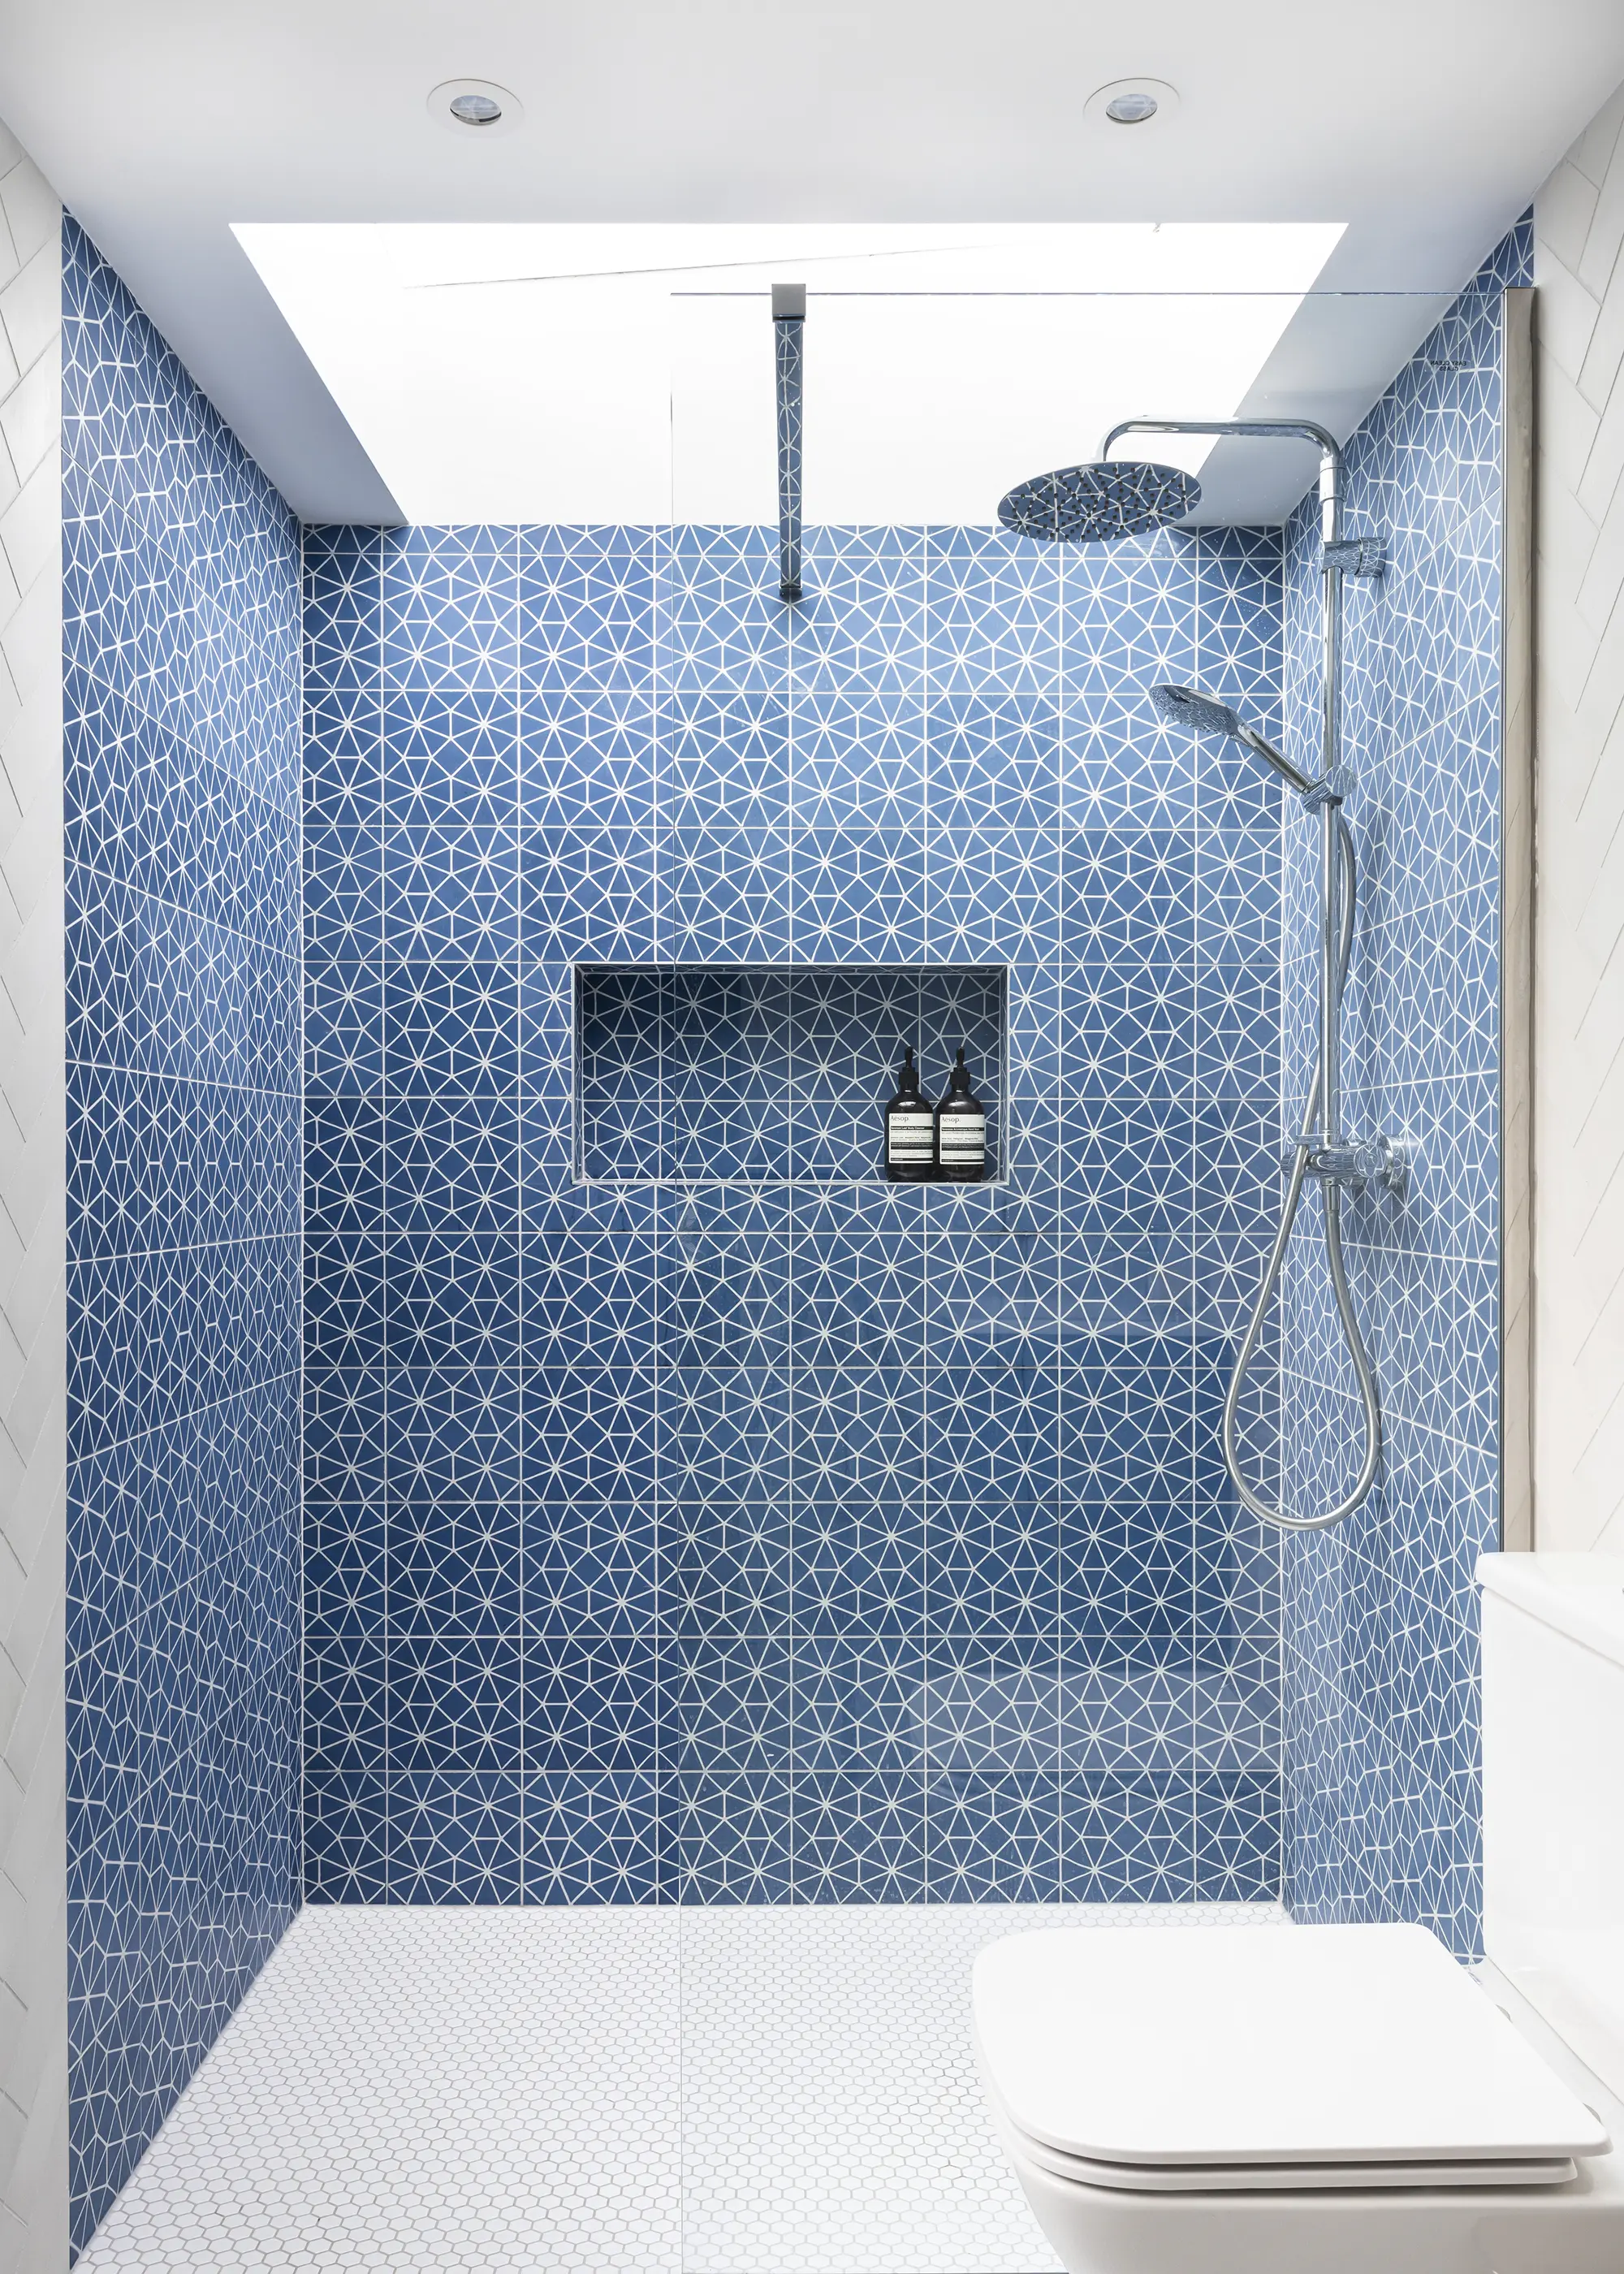 Get Creative with Tiles and Surfaces